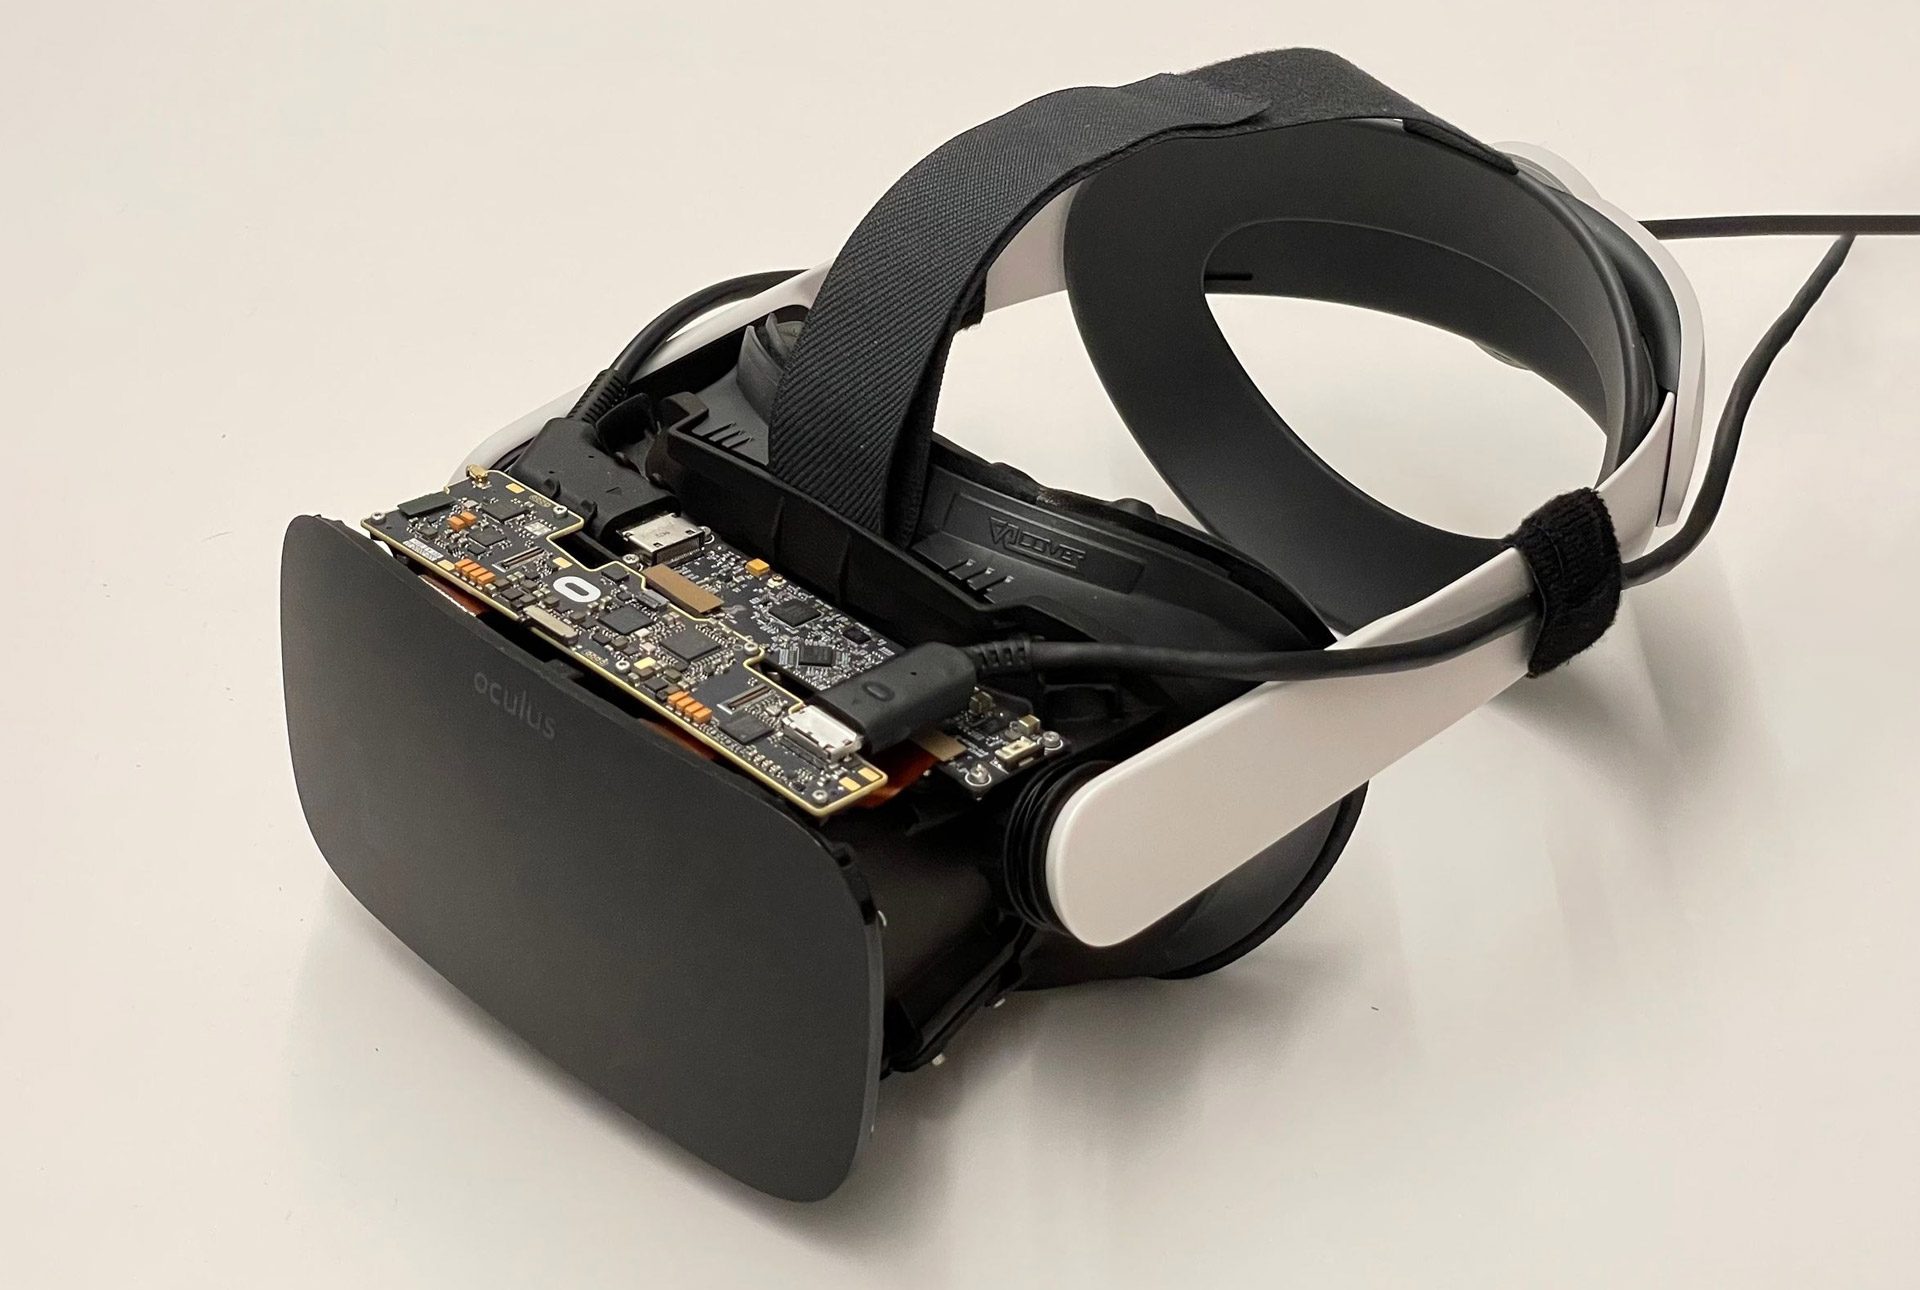 Meta VR Prototypes Aim to Make VR 'Indistinguishable From Reality'